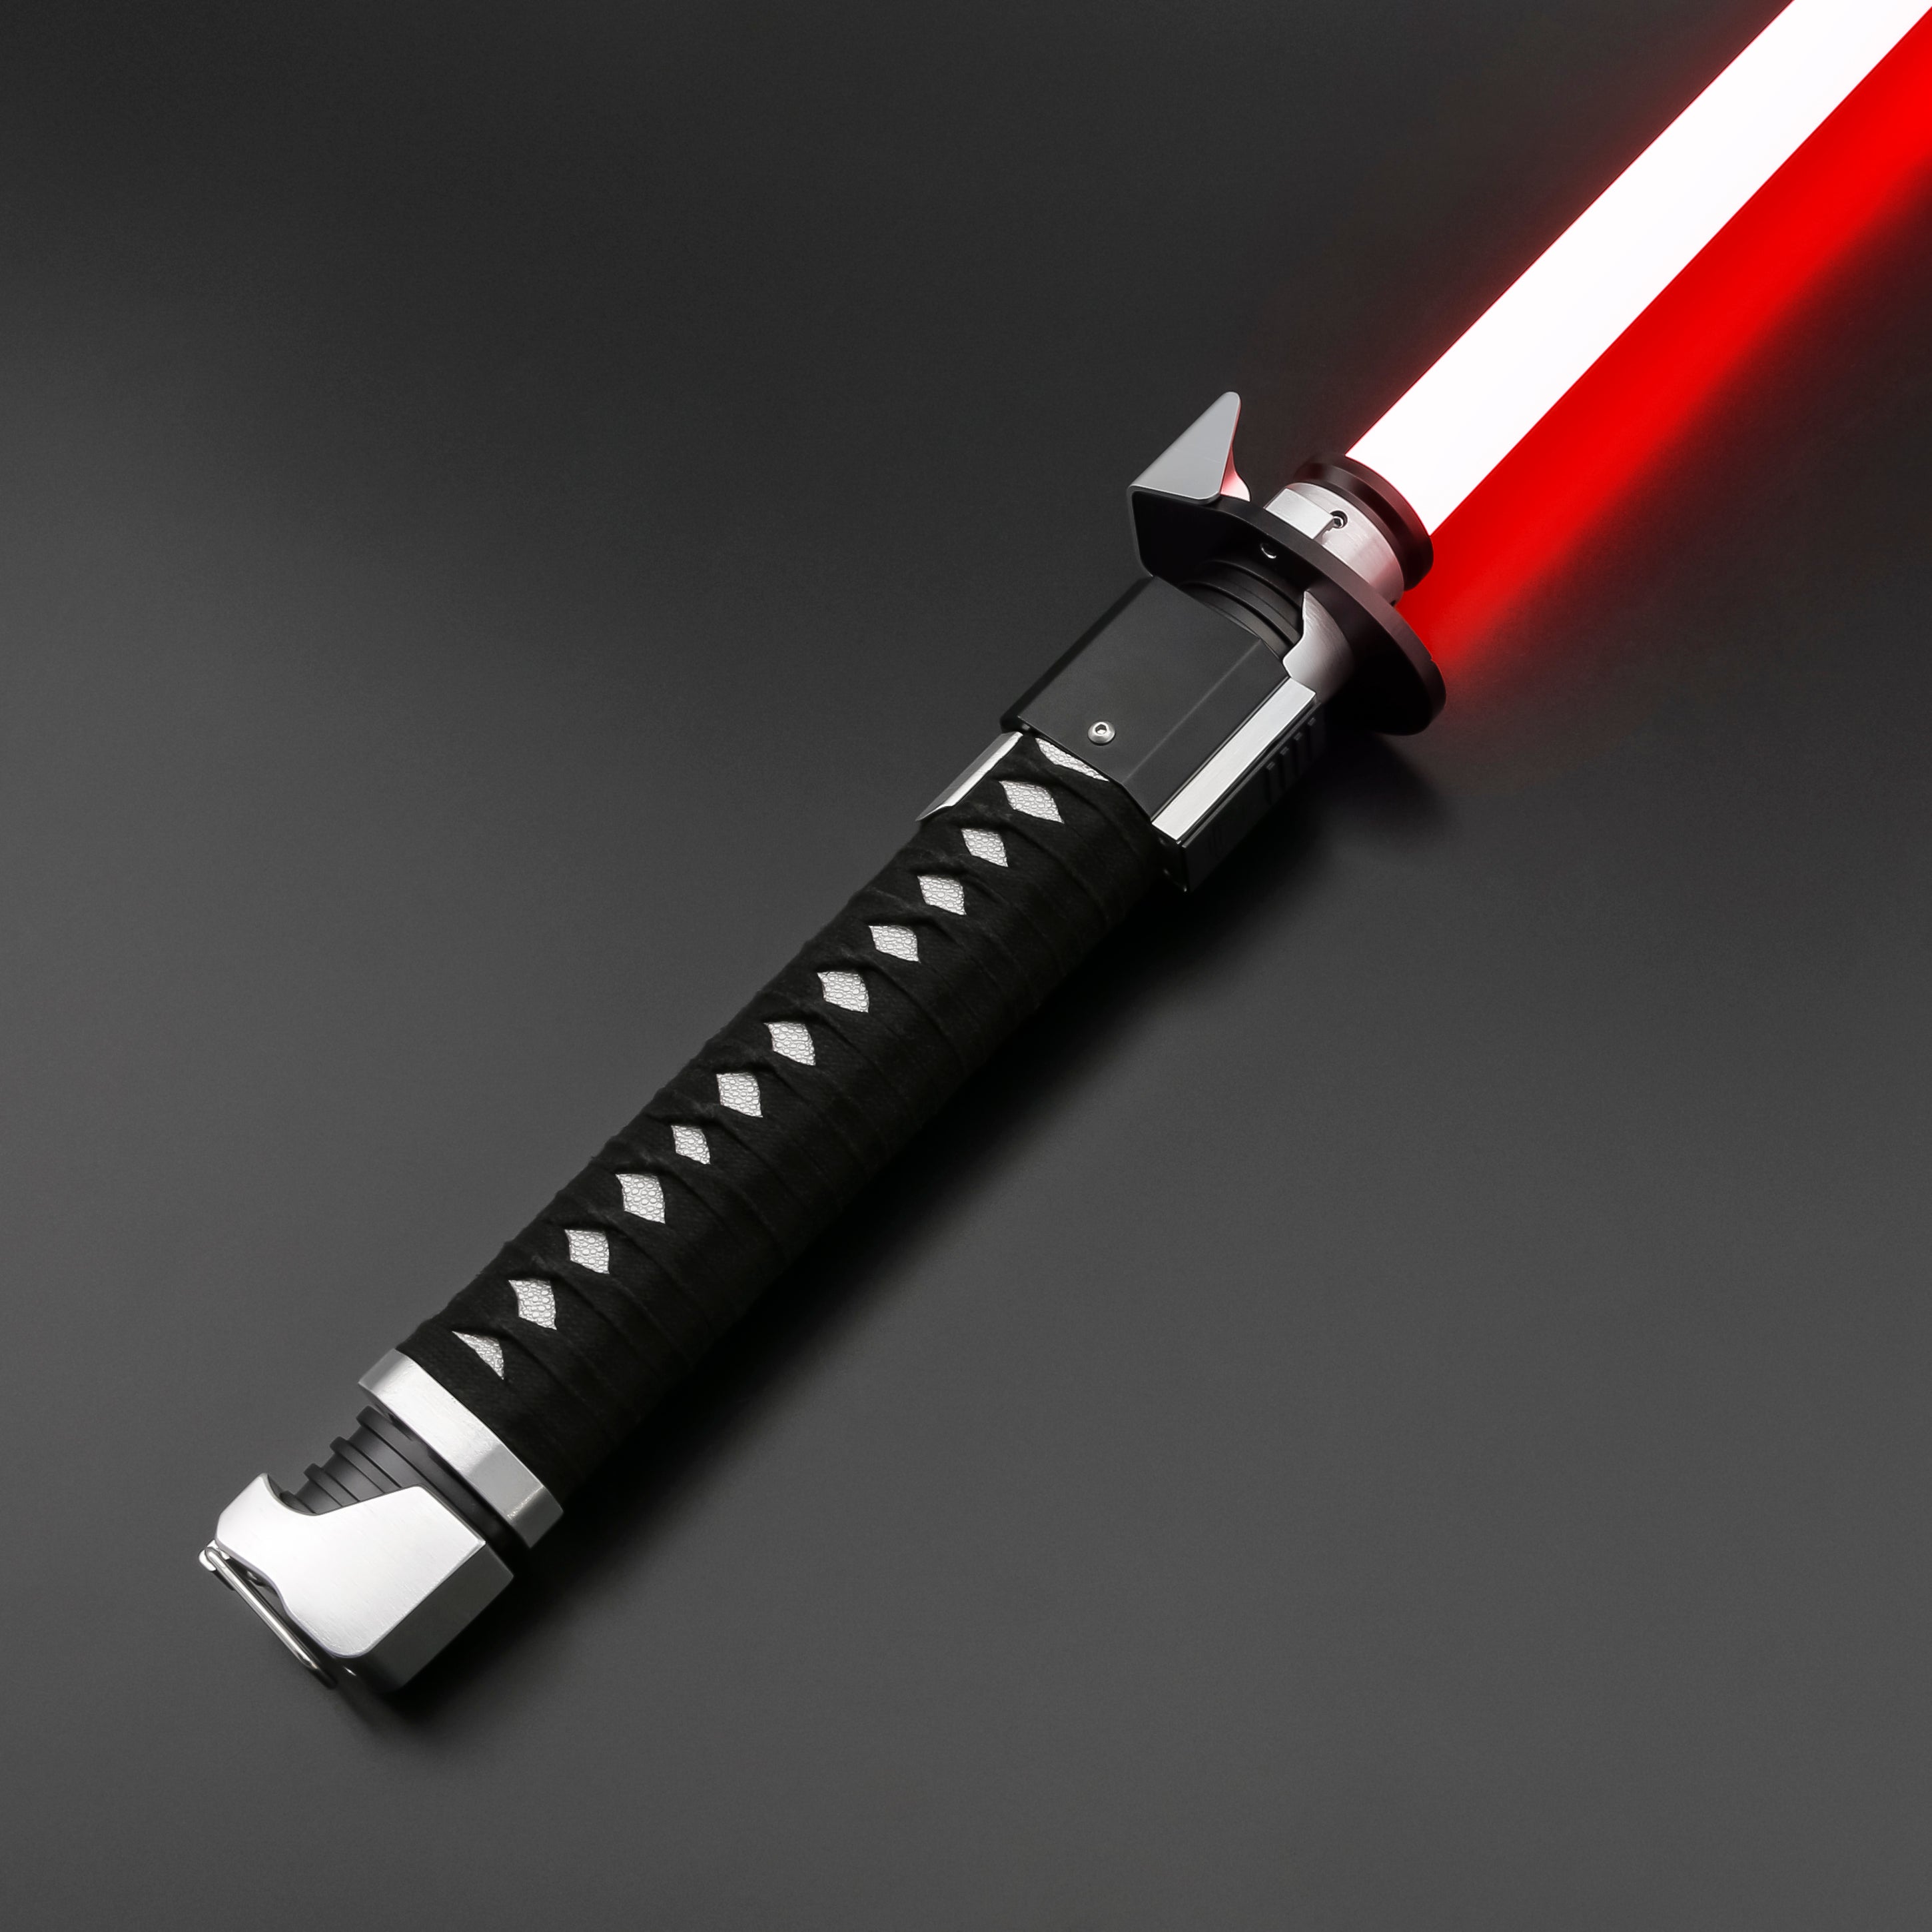 Ronin Lightsaber Realistic Lightsabers By Dynamicsabers